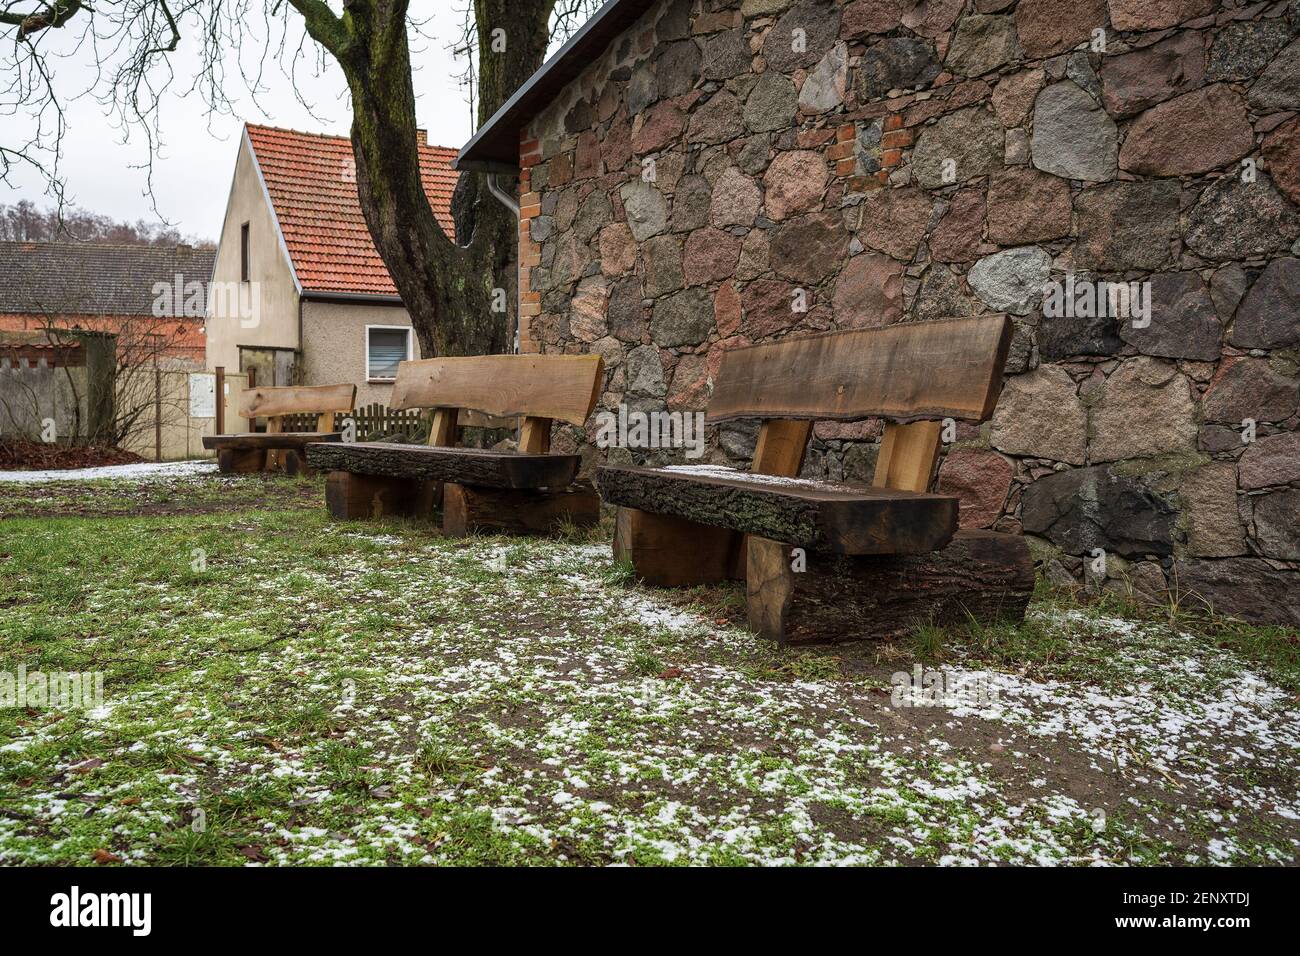 Oak benches near a stone wall. Wet snow on the ground. Stock Photo